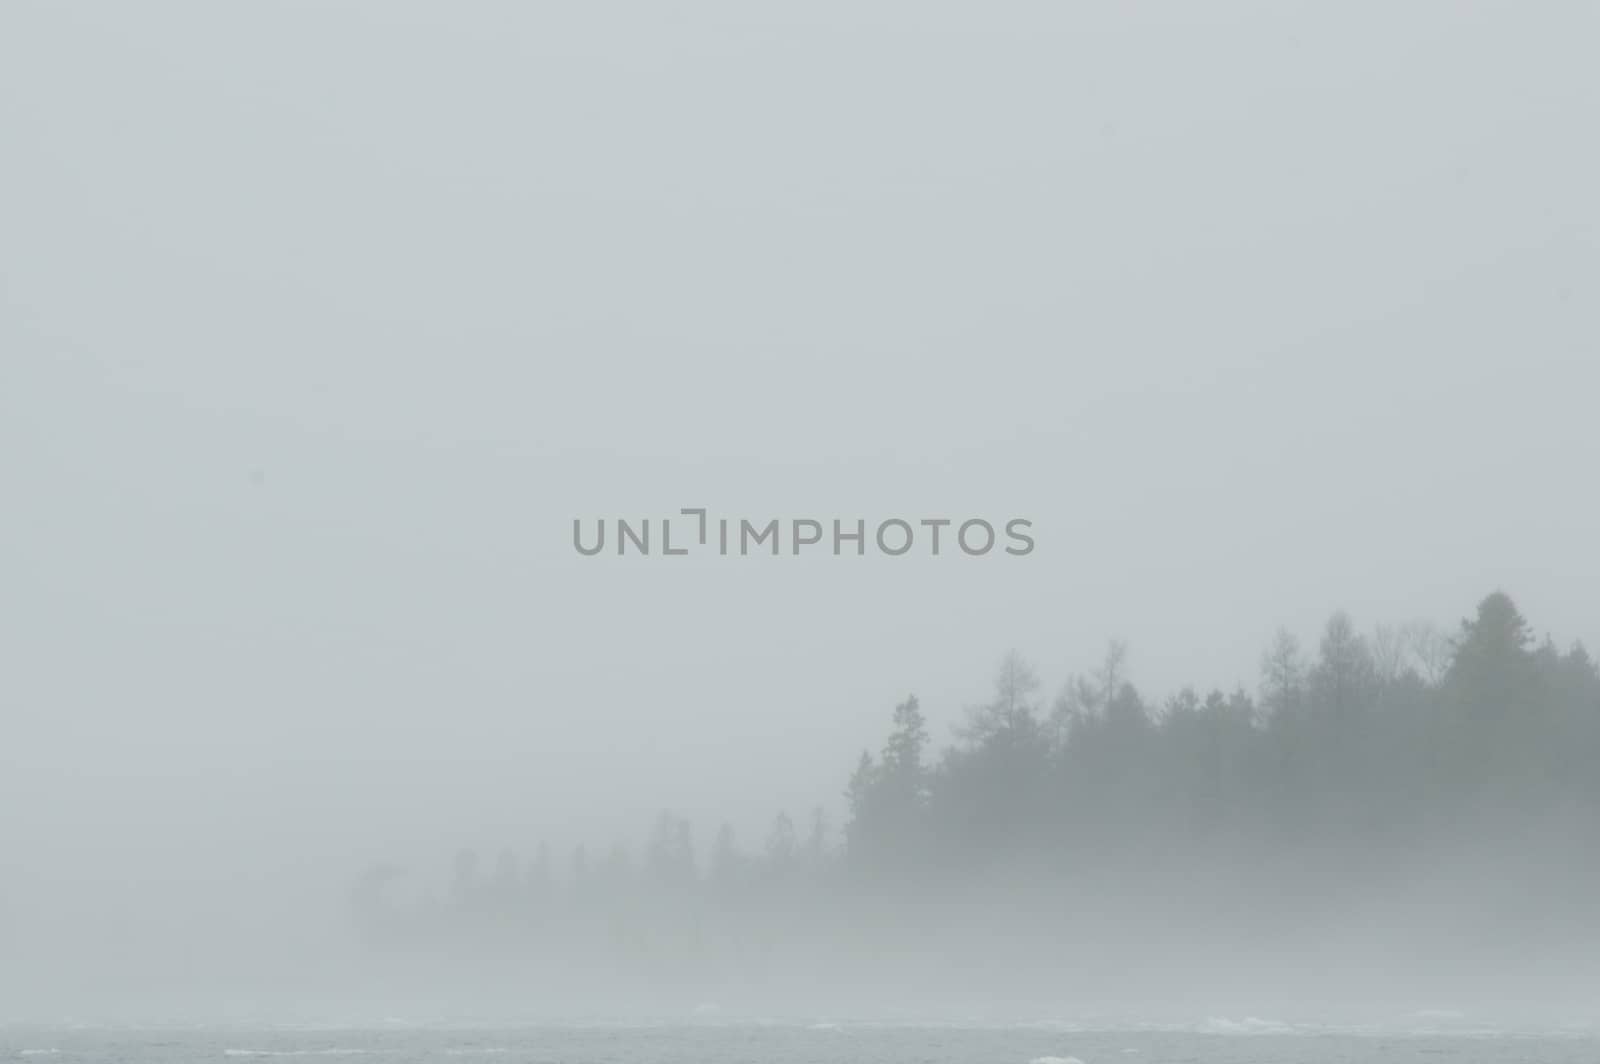 A grey and white background with almast all fog with a few faint tree silhouettes showing